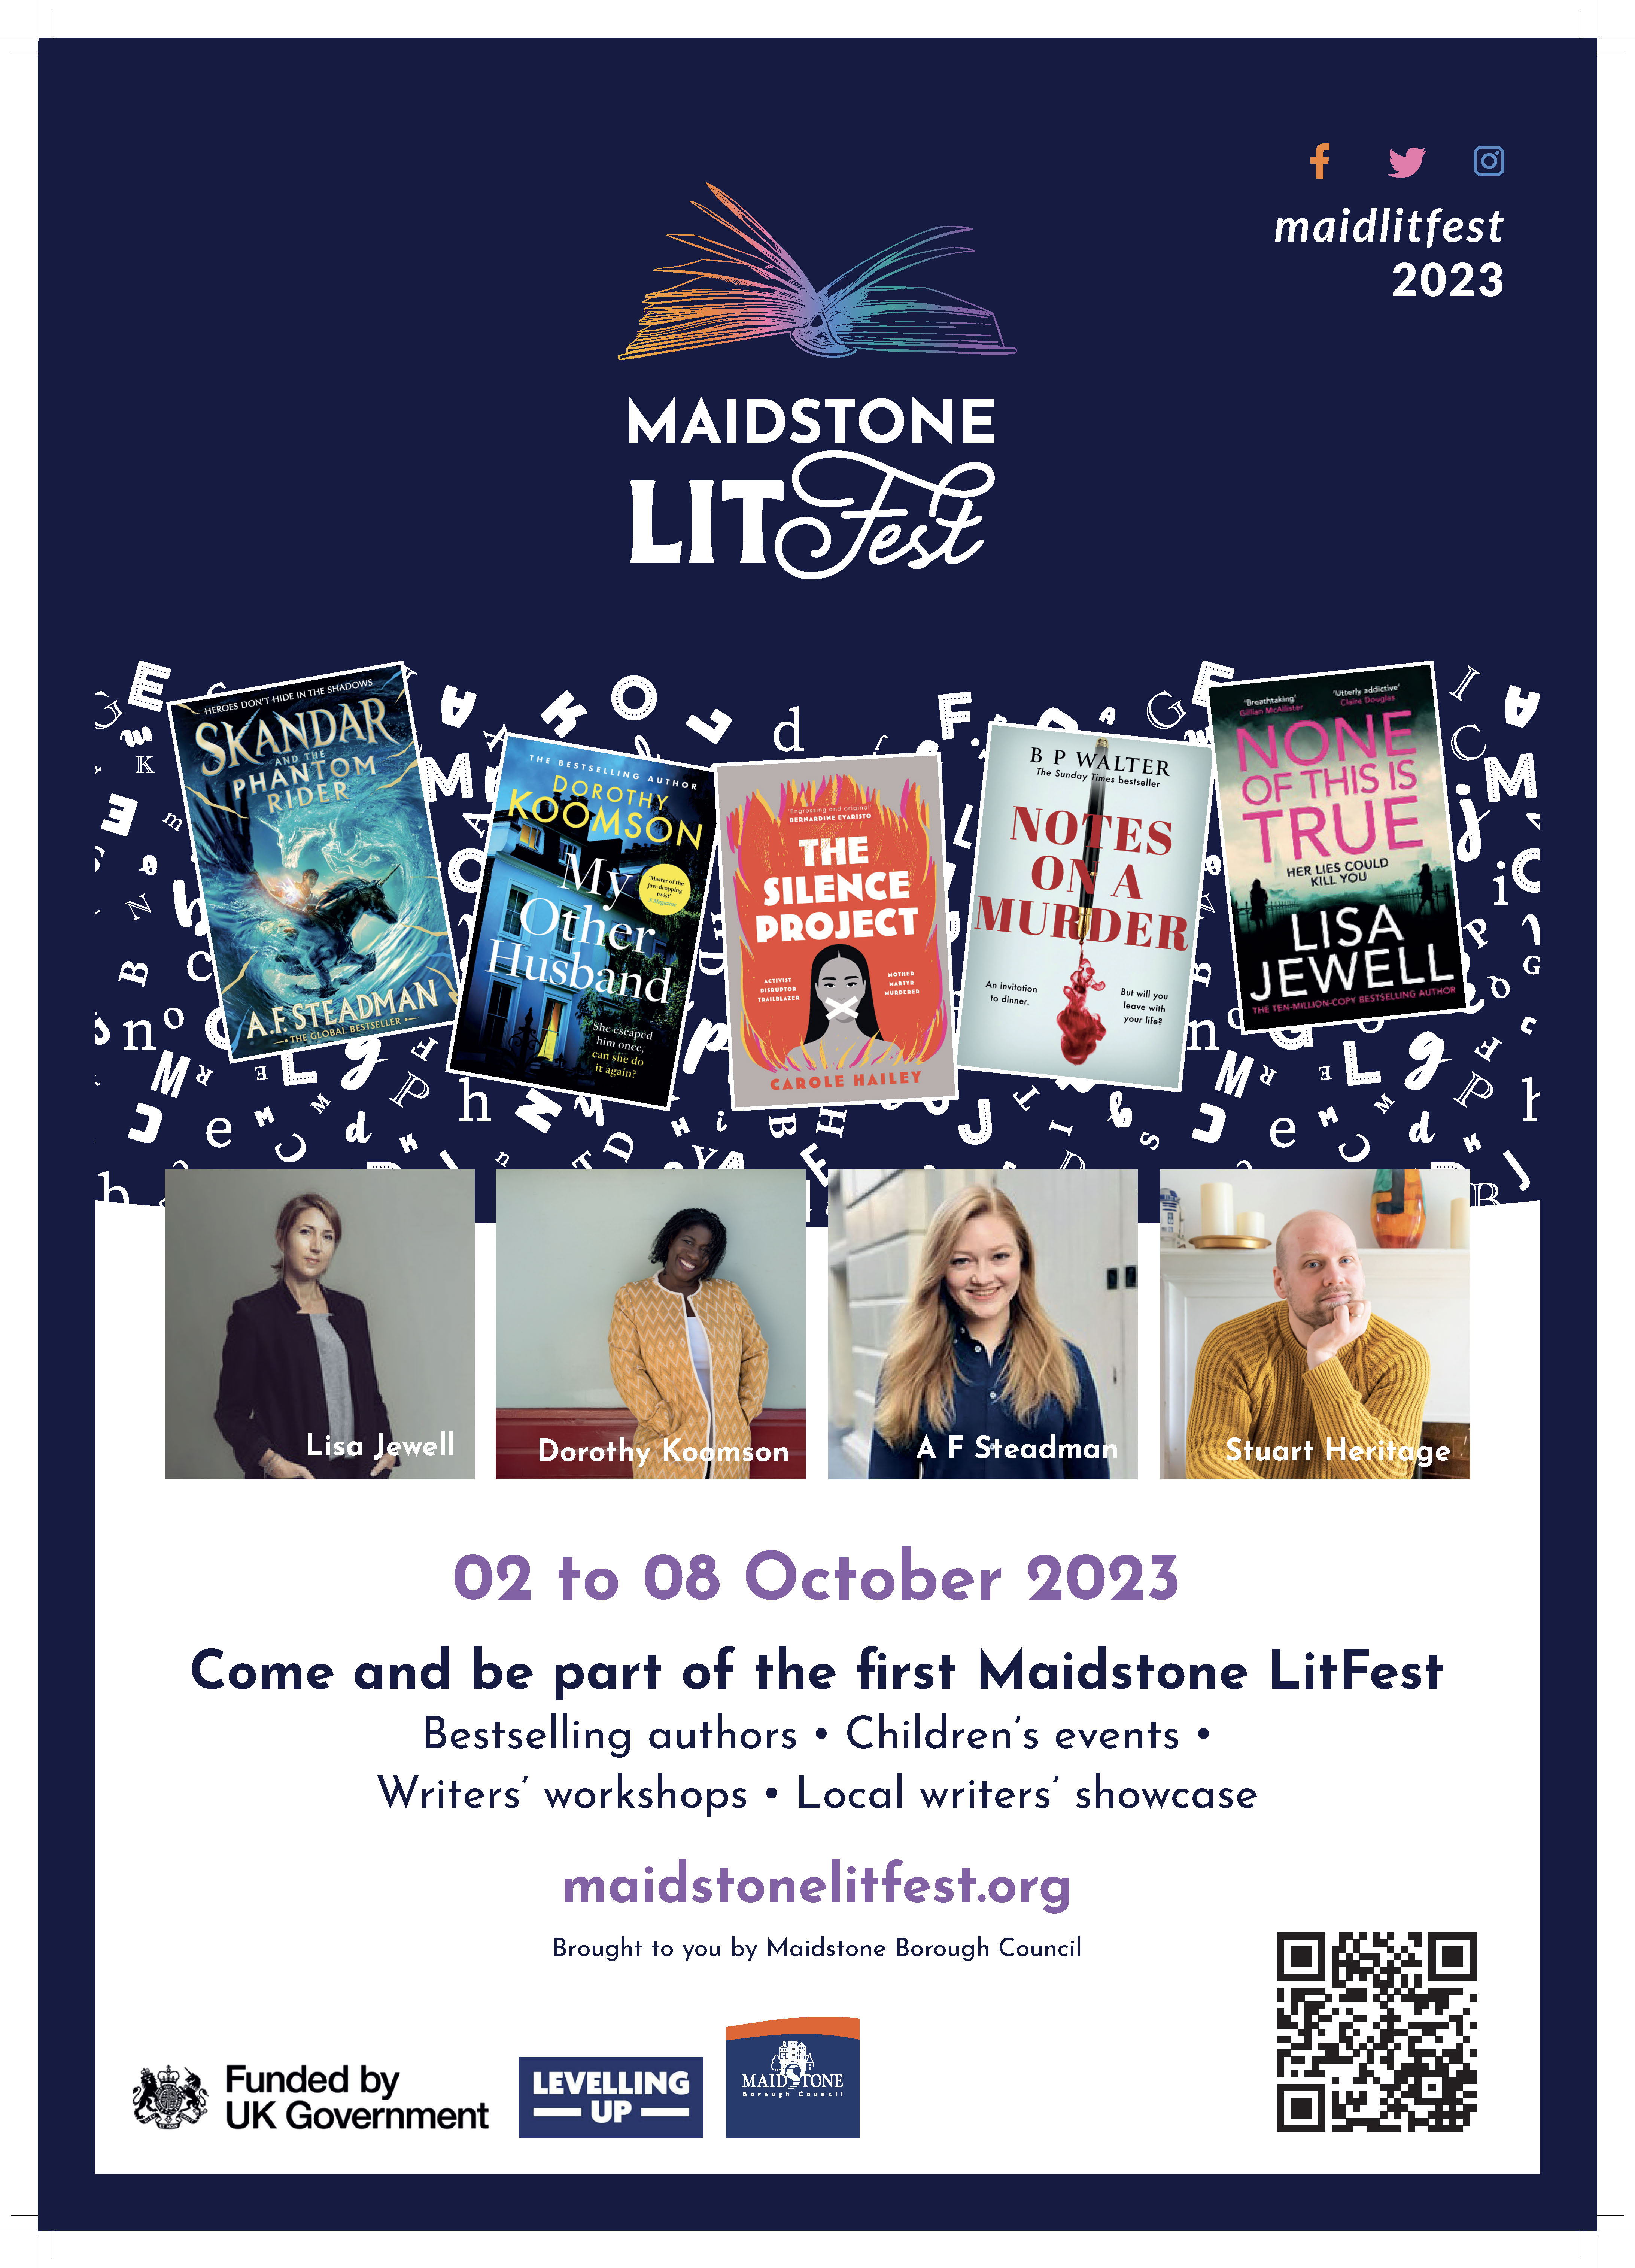 Tickets available for Maidstone’s first Literary Festival